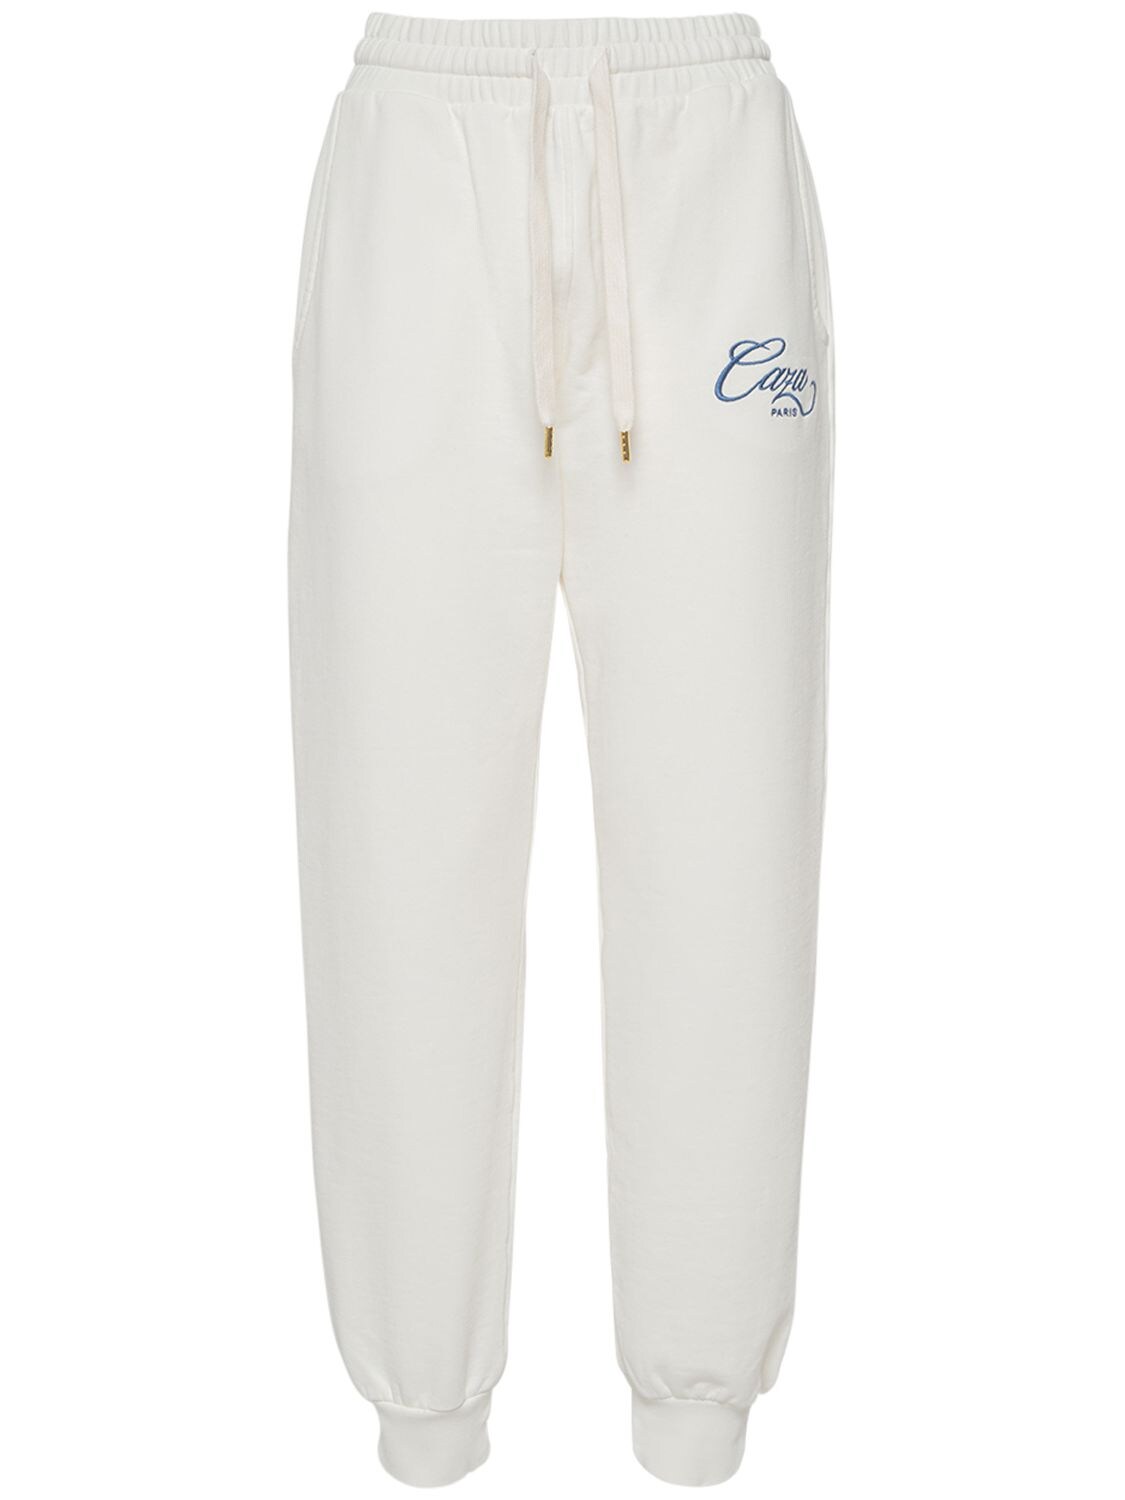 CASABLANCA CAZA EMBROIDERED COTTON SWEATtrousers